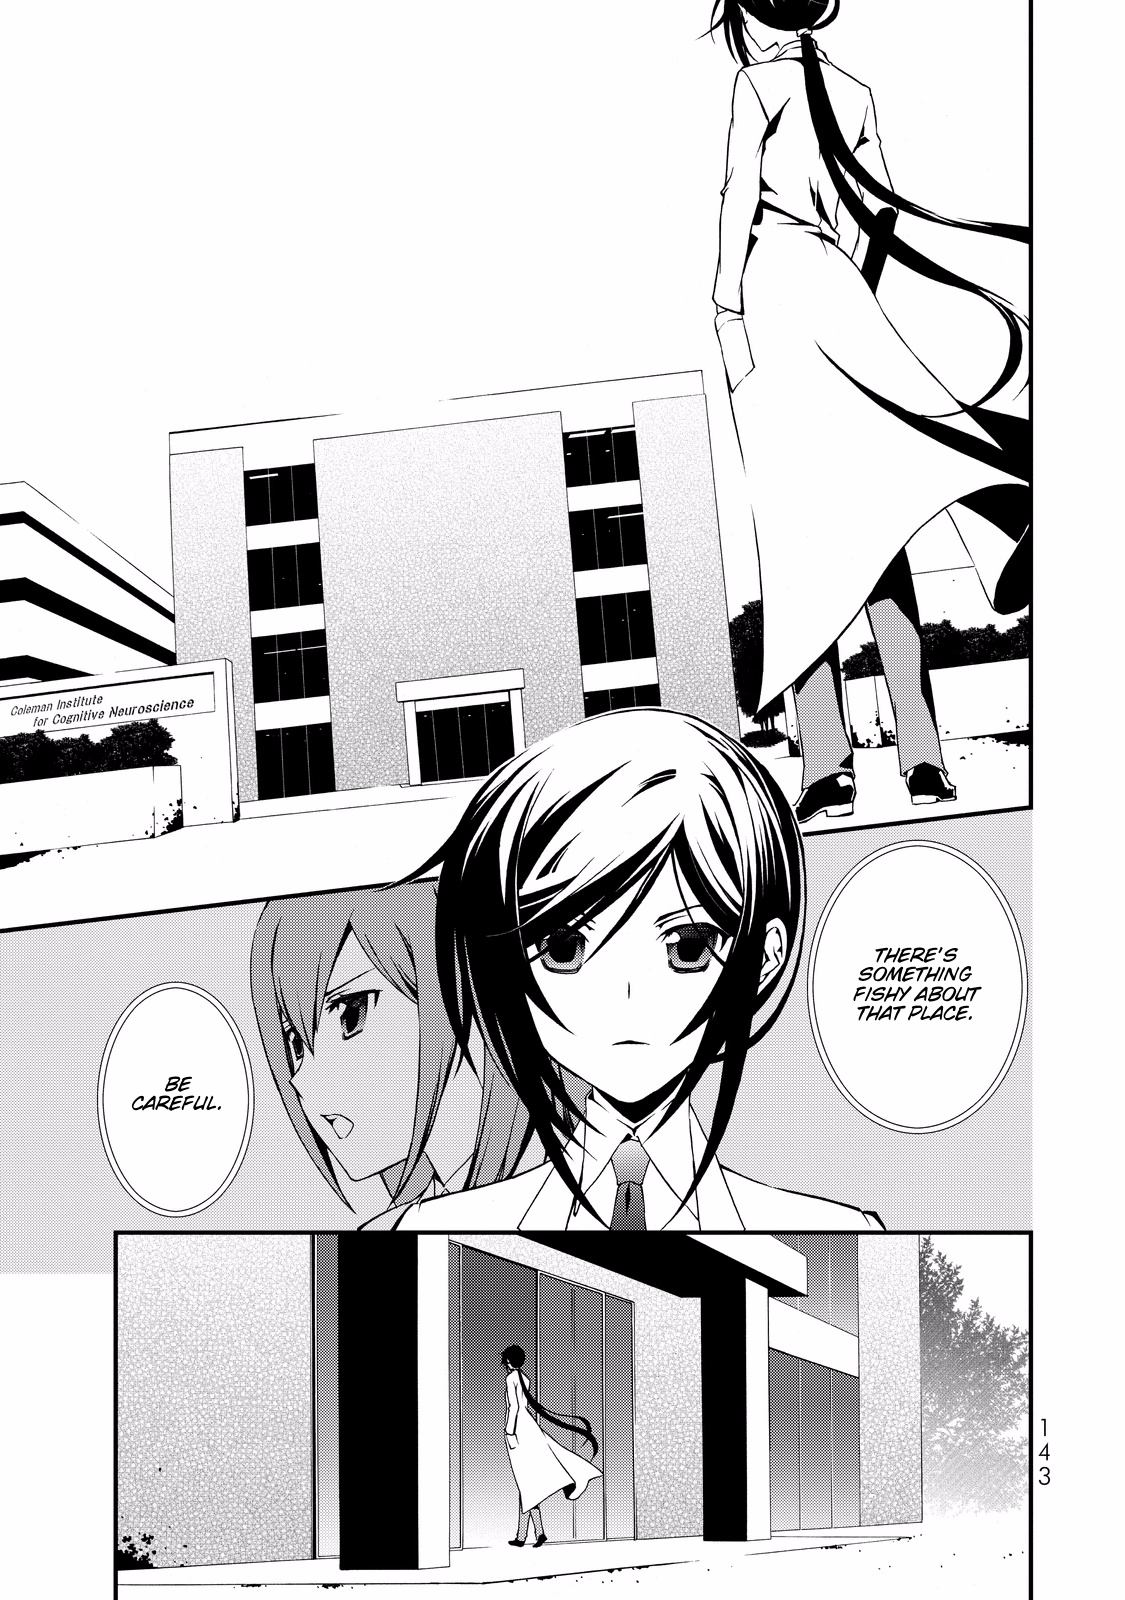 Chaos;child ～Children's Collapse～ Vol.1 Chapter 4